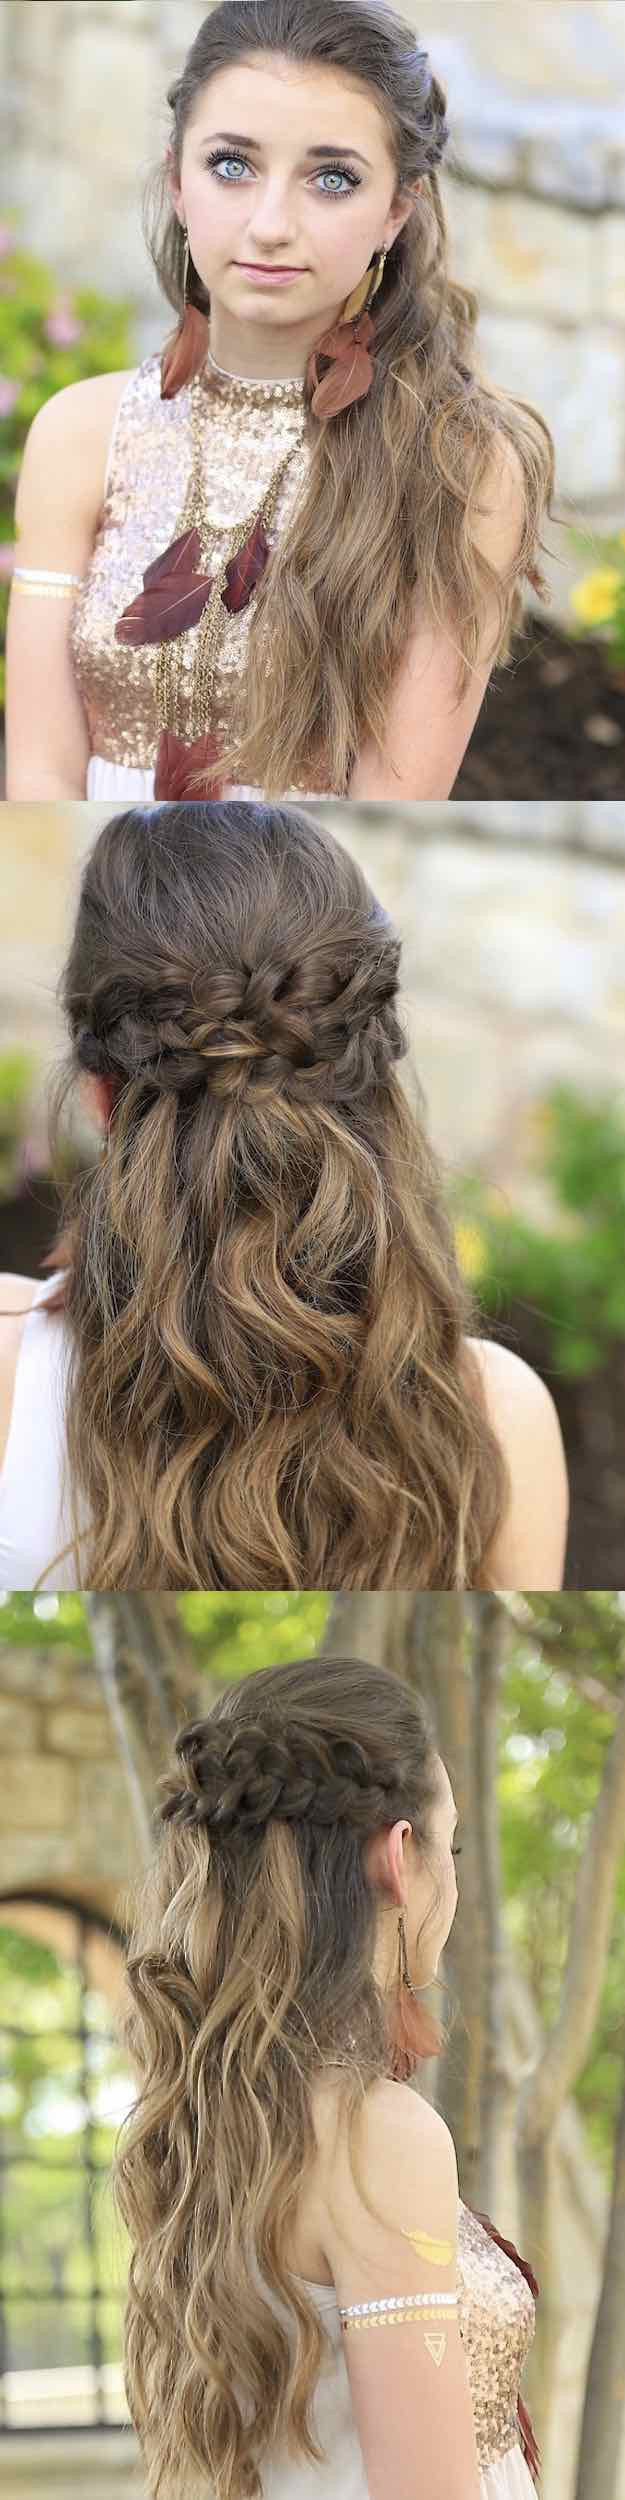 Prom Half Up Half Down Hairstyles
 25 Easy Half Up Half Down Hairstyle Tutorials For Prom